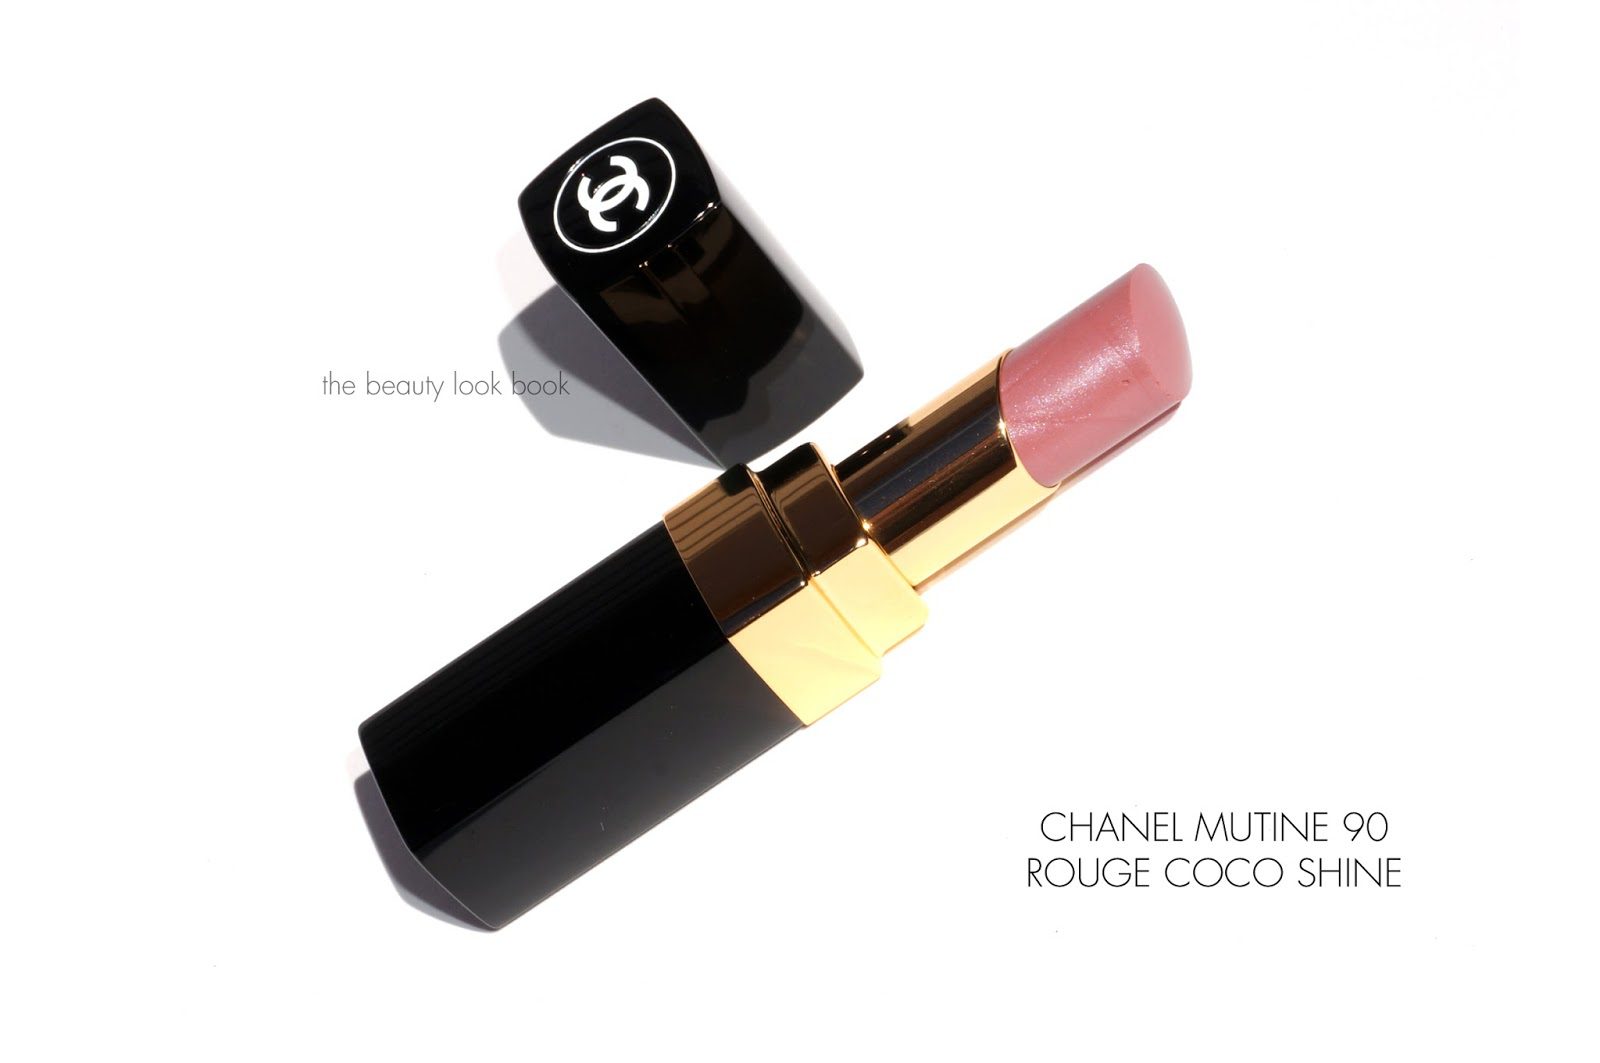 Chanel Mutine Rouge Coco Shine, #181 and Tocade #182 Glossimers | Collection Variation - The Look Book